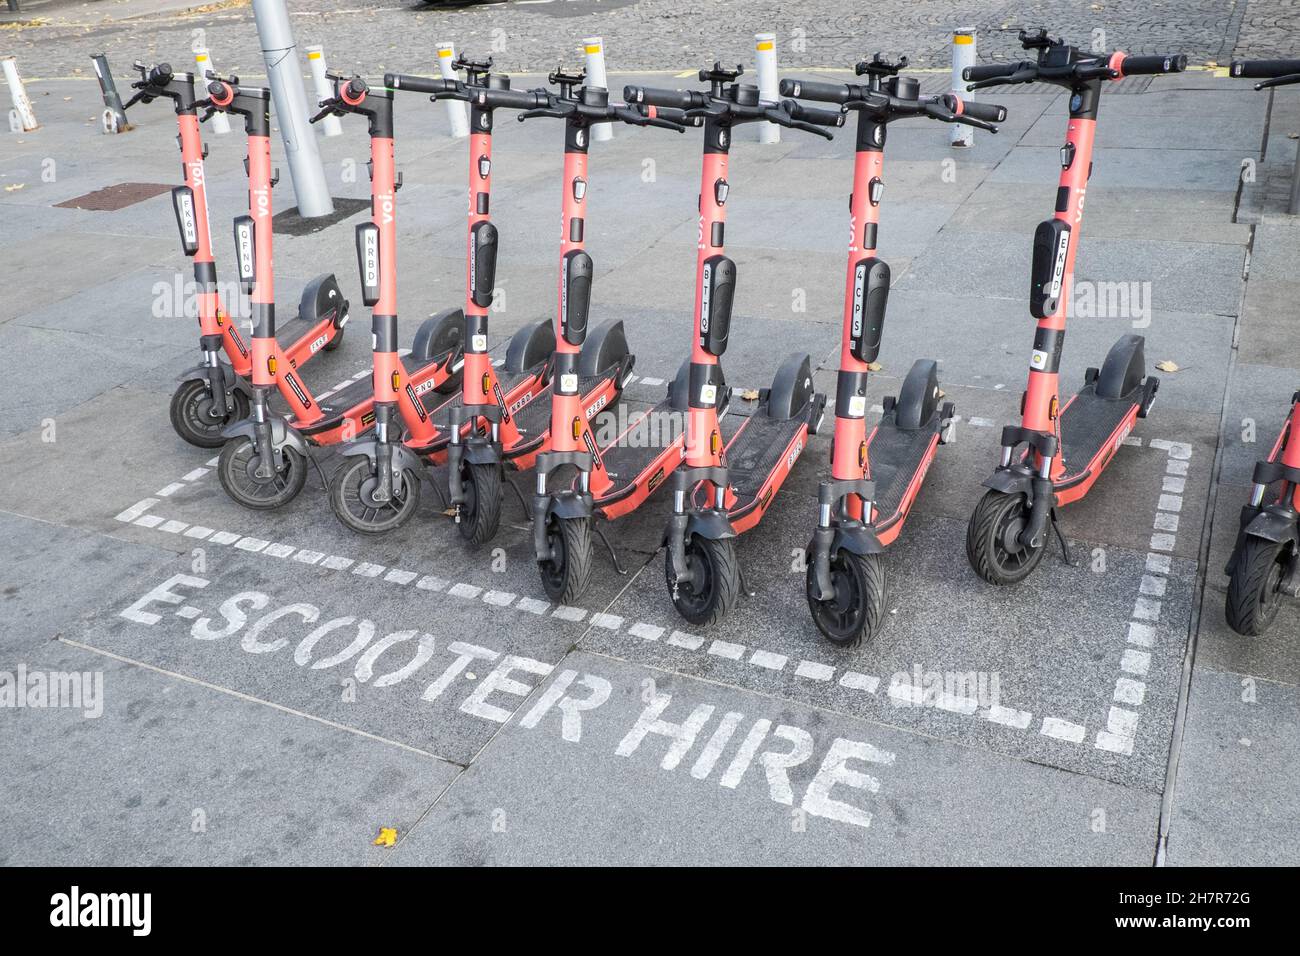 E-scooters,scooter,Electric scooters,pink,red,scooters ,owned,by,Voi,company,on,the,street,for,hire,rent,via,an,app,as,a,trial,period,to,see,if,they,are,safe,and,suitable,for,general,public,usage.Illegal,in,most,cities,in,UK,Liverpool,Merseyside,north  ...